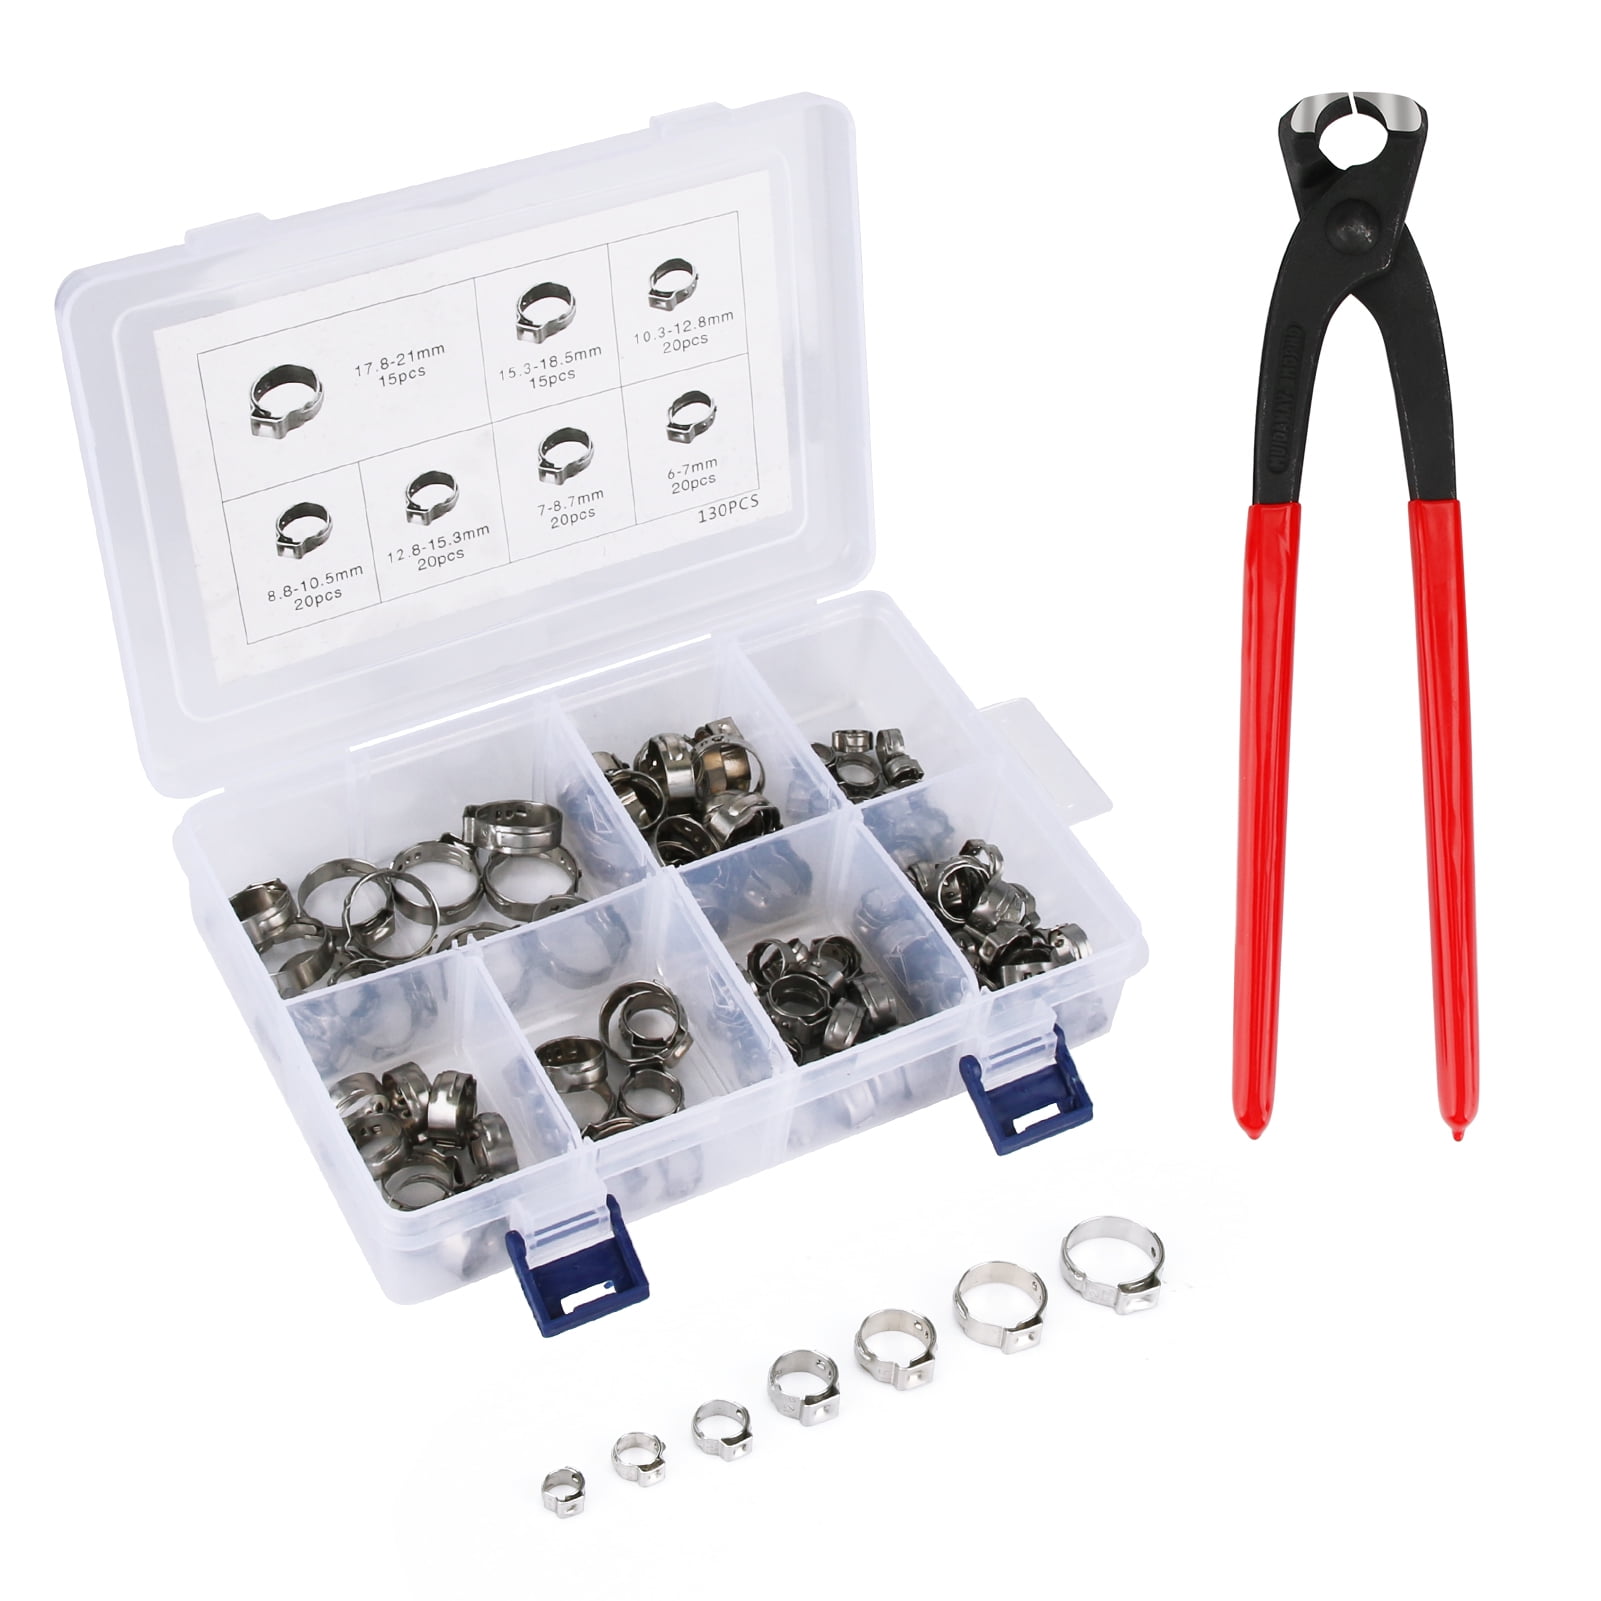 130PCS Single Ear Hose Clamps /Ear Crimping Tool Kit With 304 Stainless Steel 